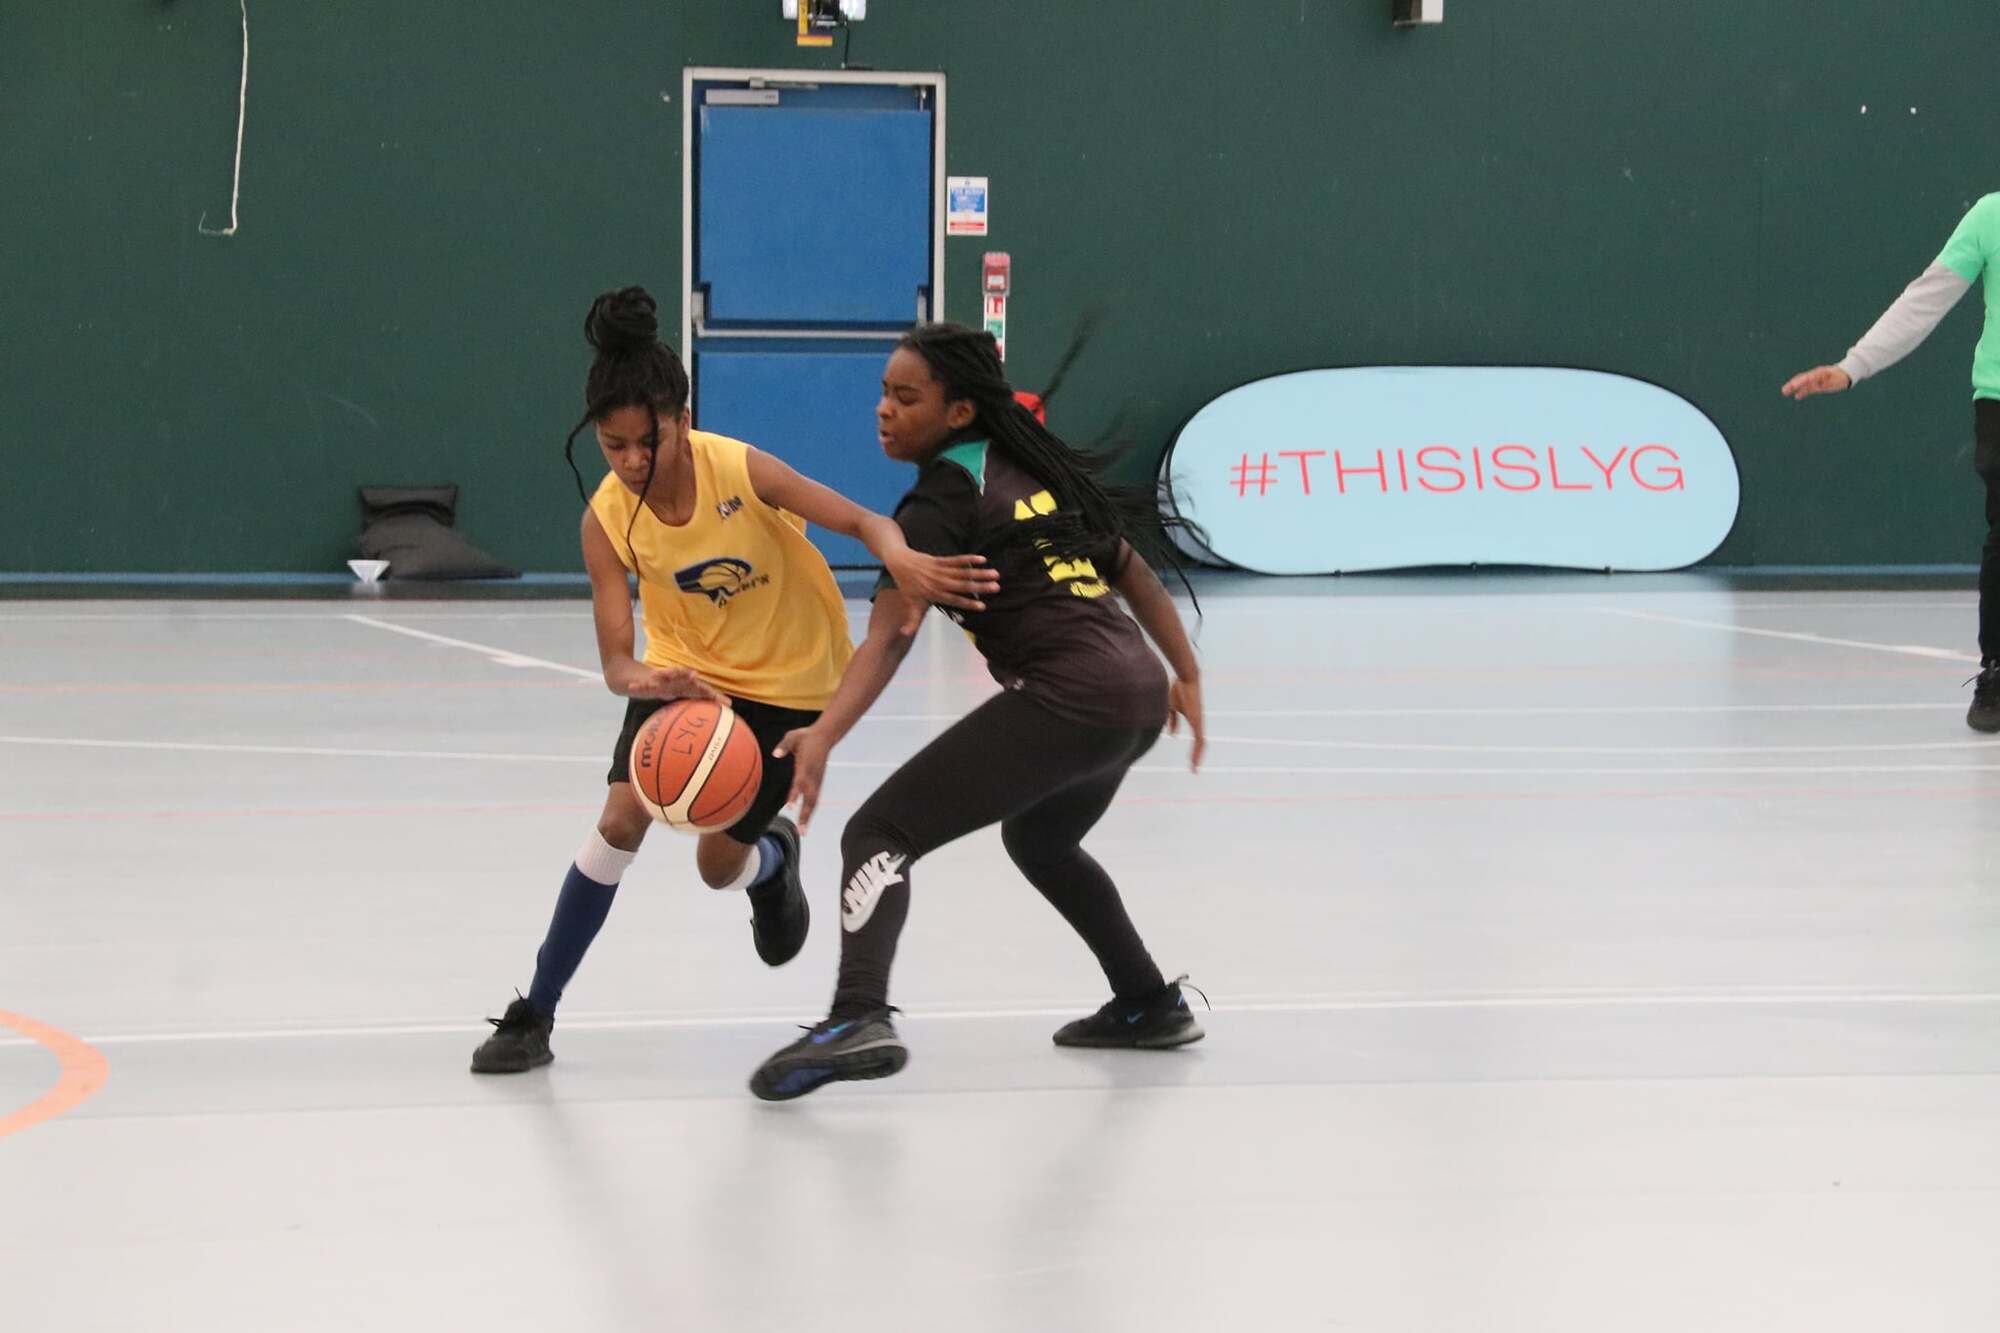 Two girls playing basketball on an indoor court, dribbling and shooting the ball towards the hoop.